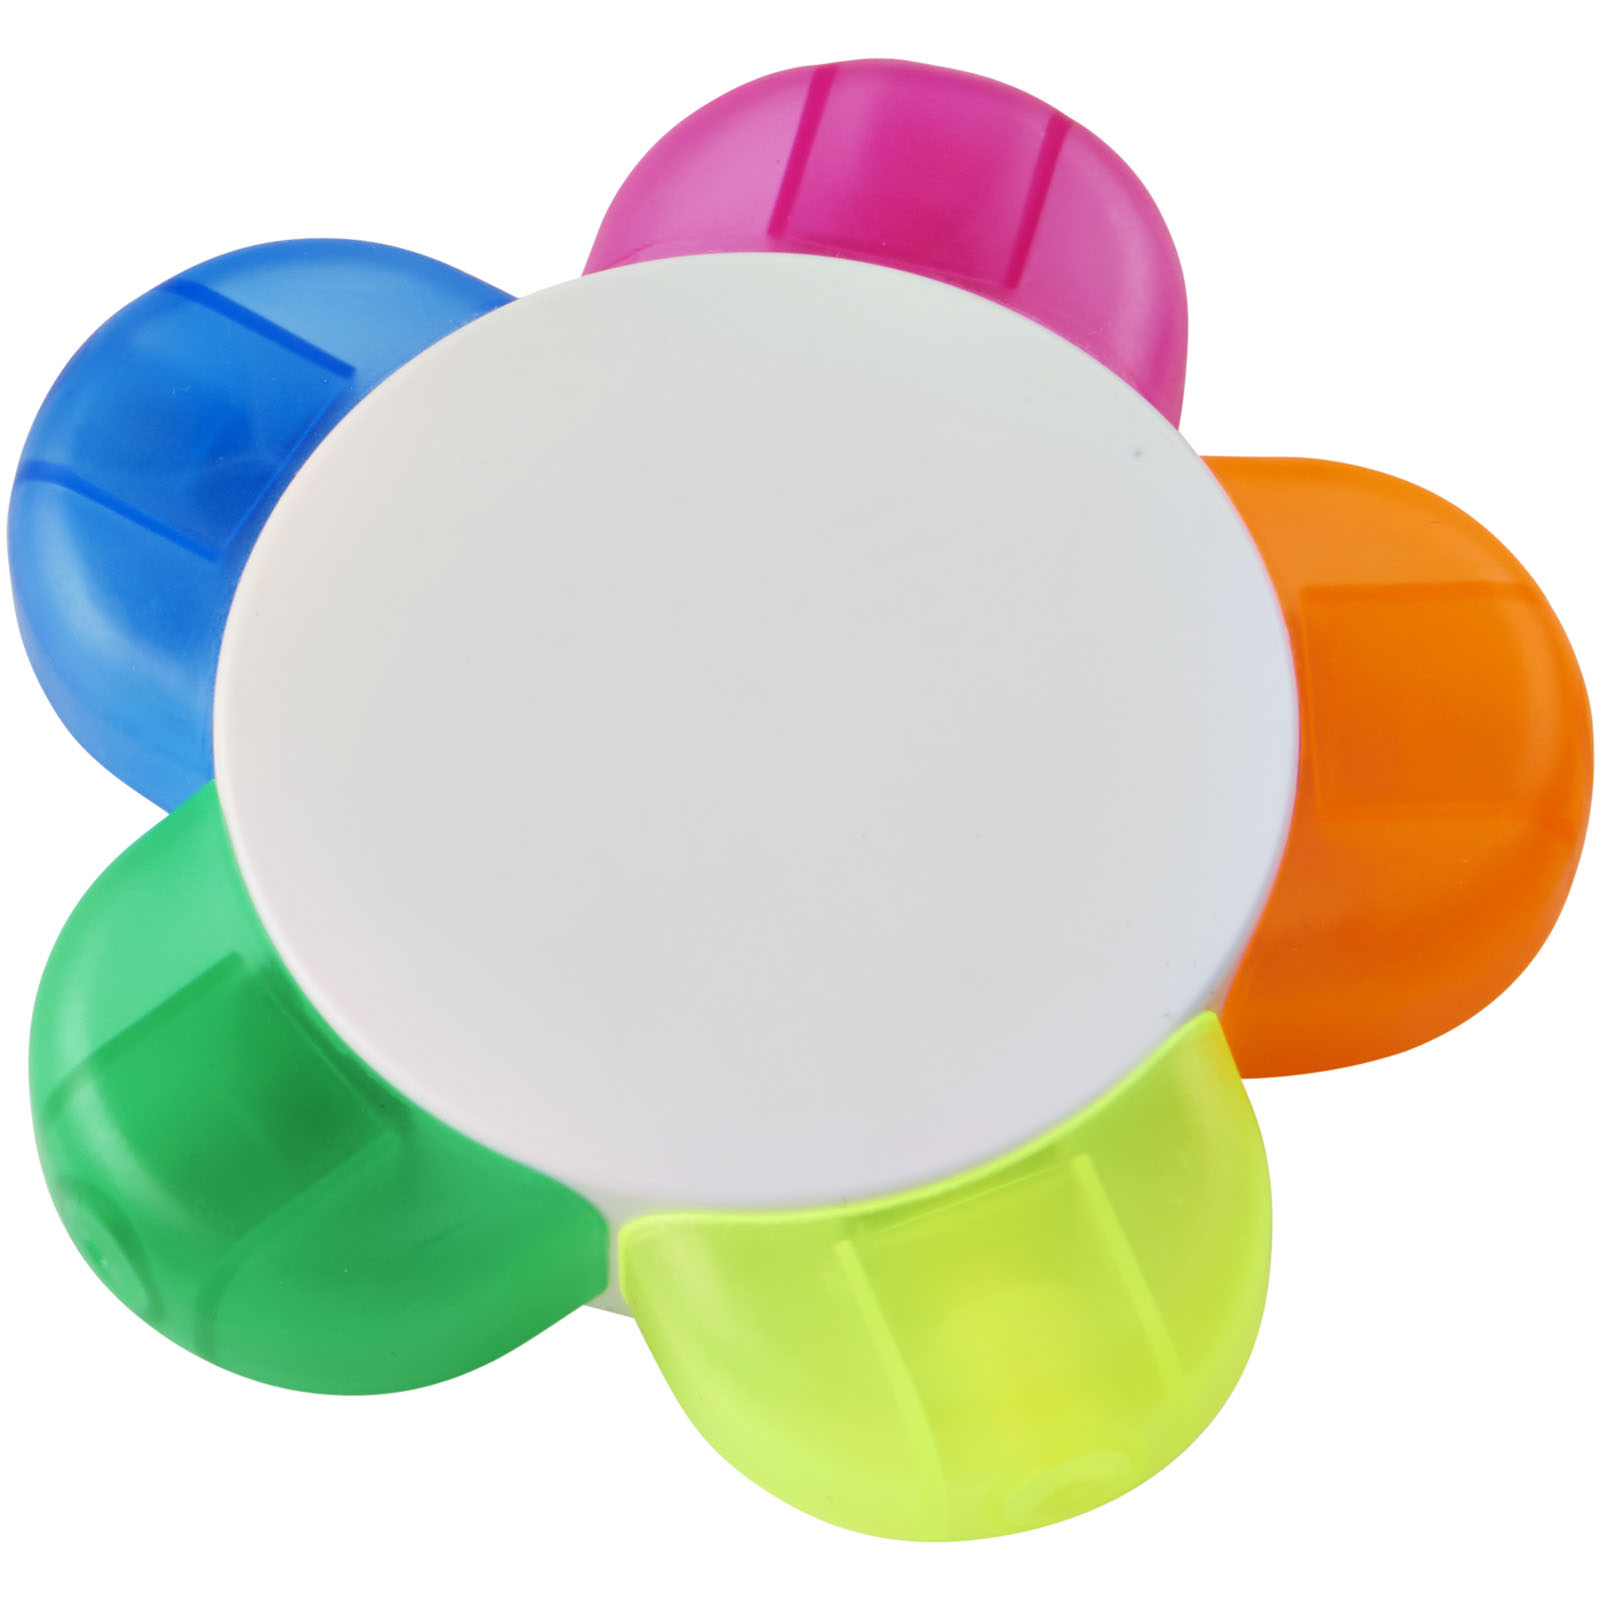 Highlighter in the shape of a flower with five colors - West Goscote